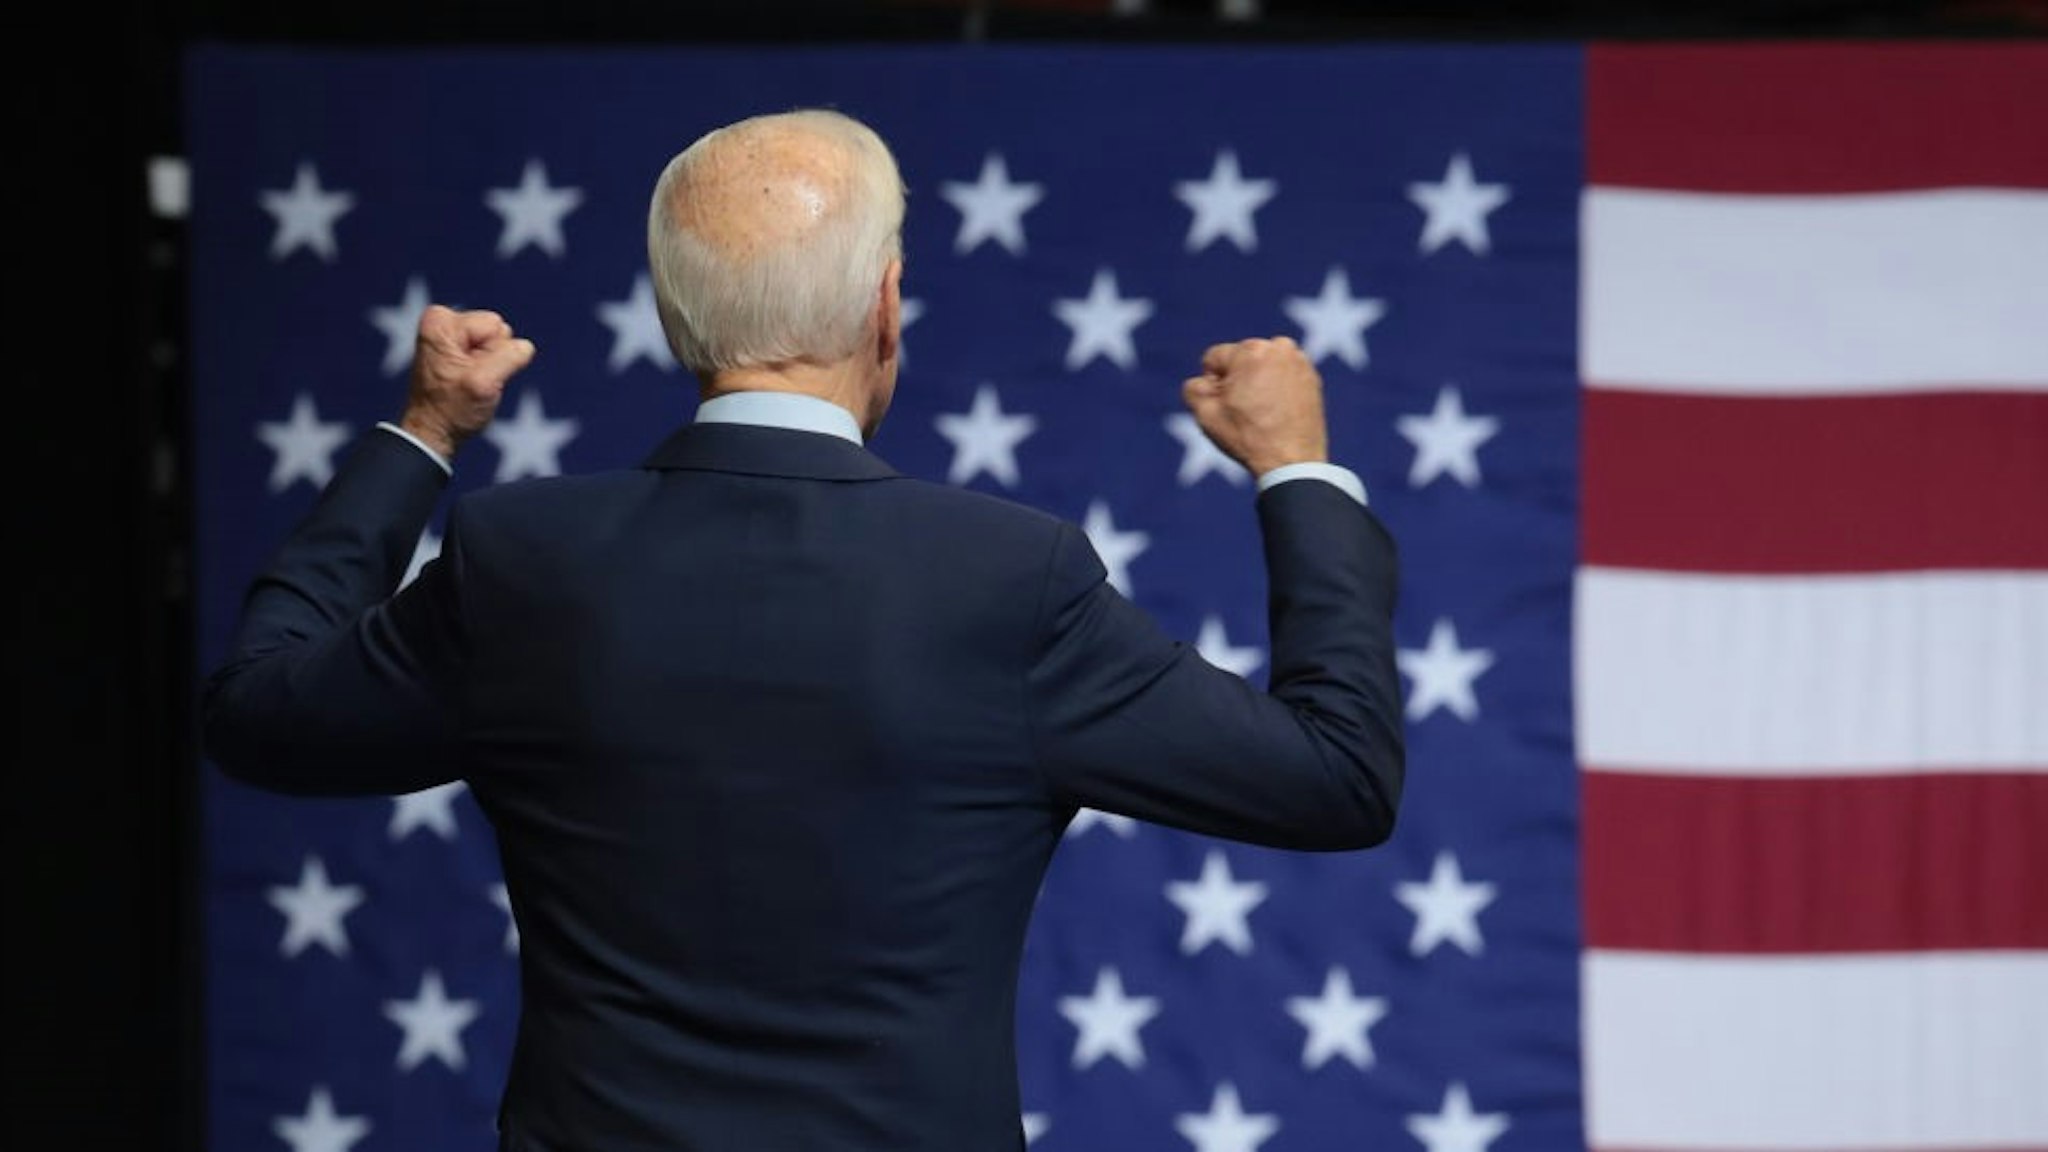 Democratic presidential candidate, former Vice President Joe Biden leaves the stage after speaking at the Liberty and Justice Celebration at the Wells Fargo Arena on November 01, 2019 in Des Moines, Iowa.